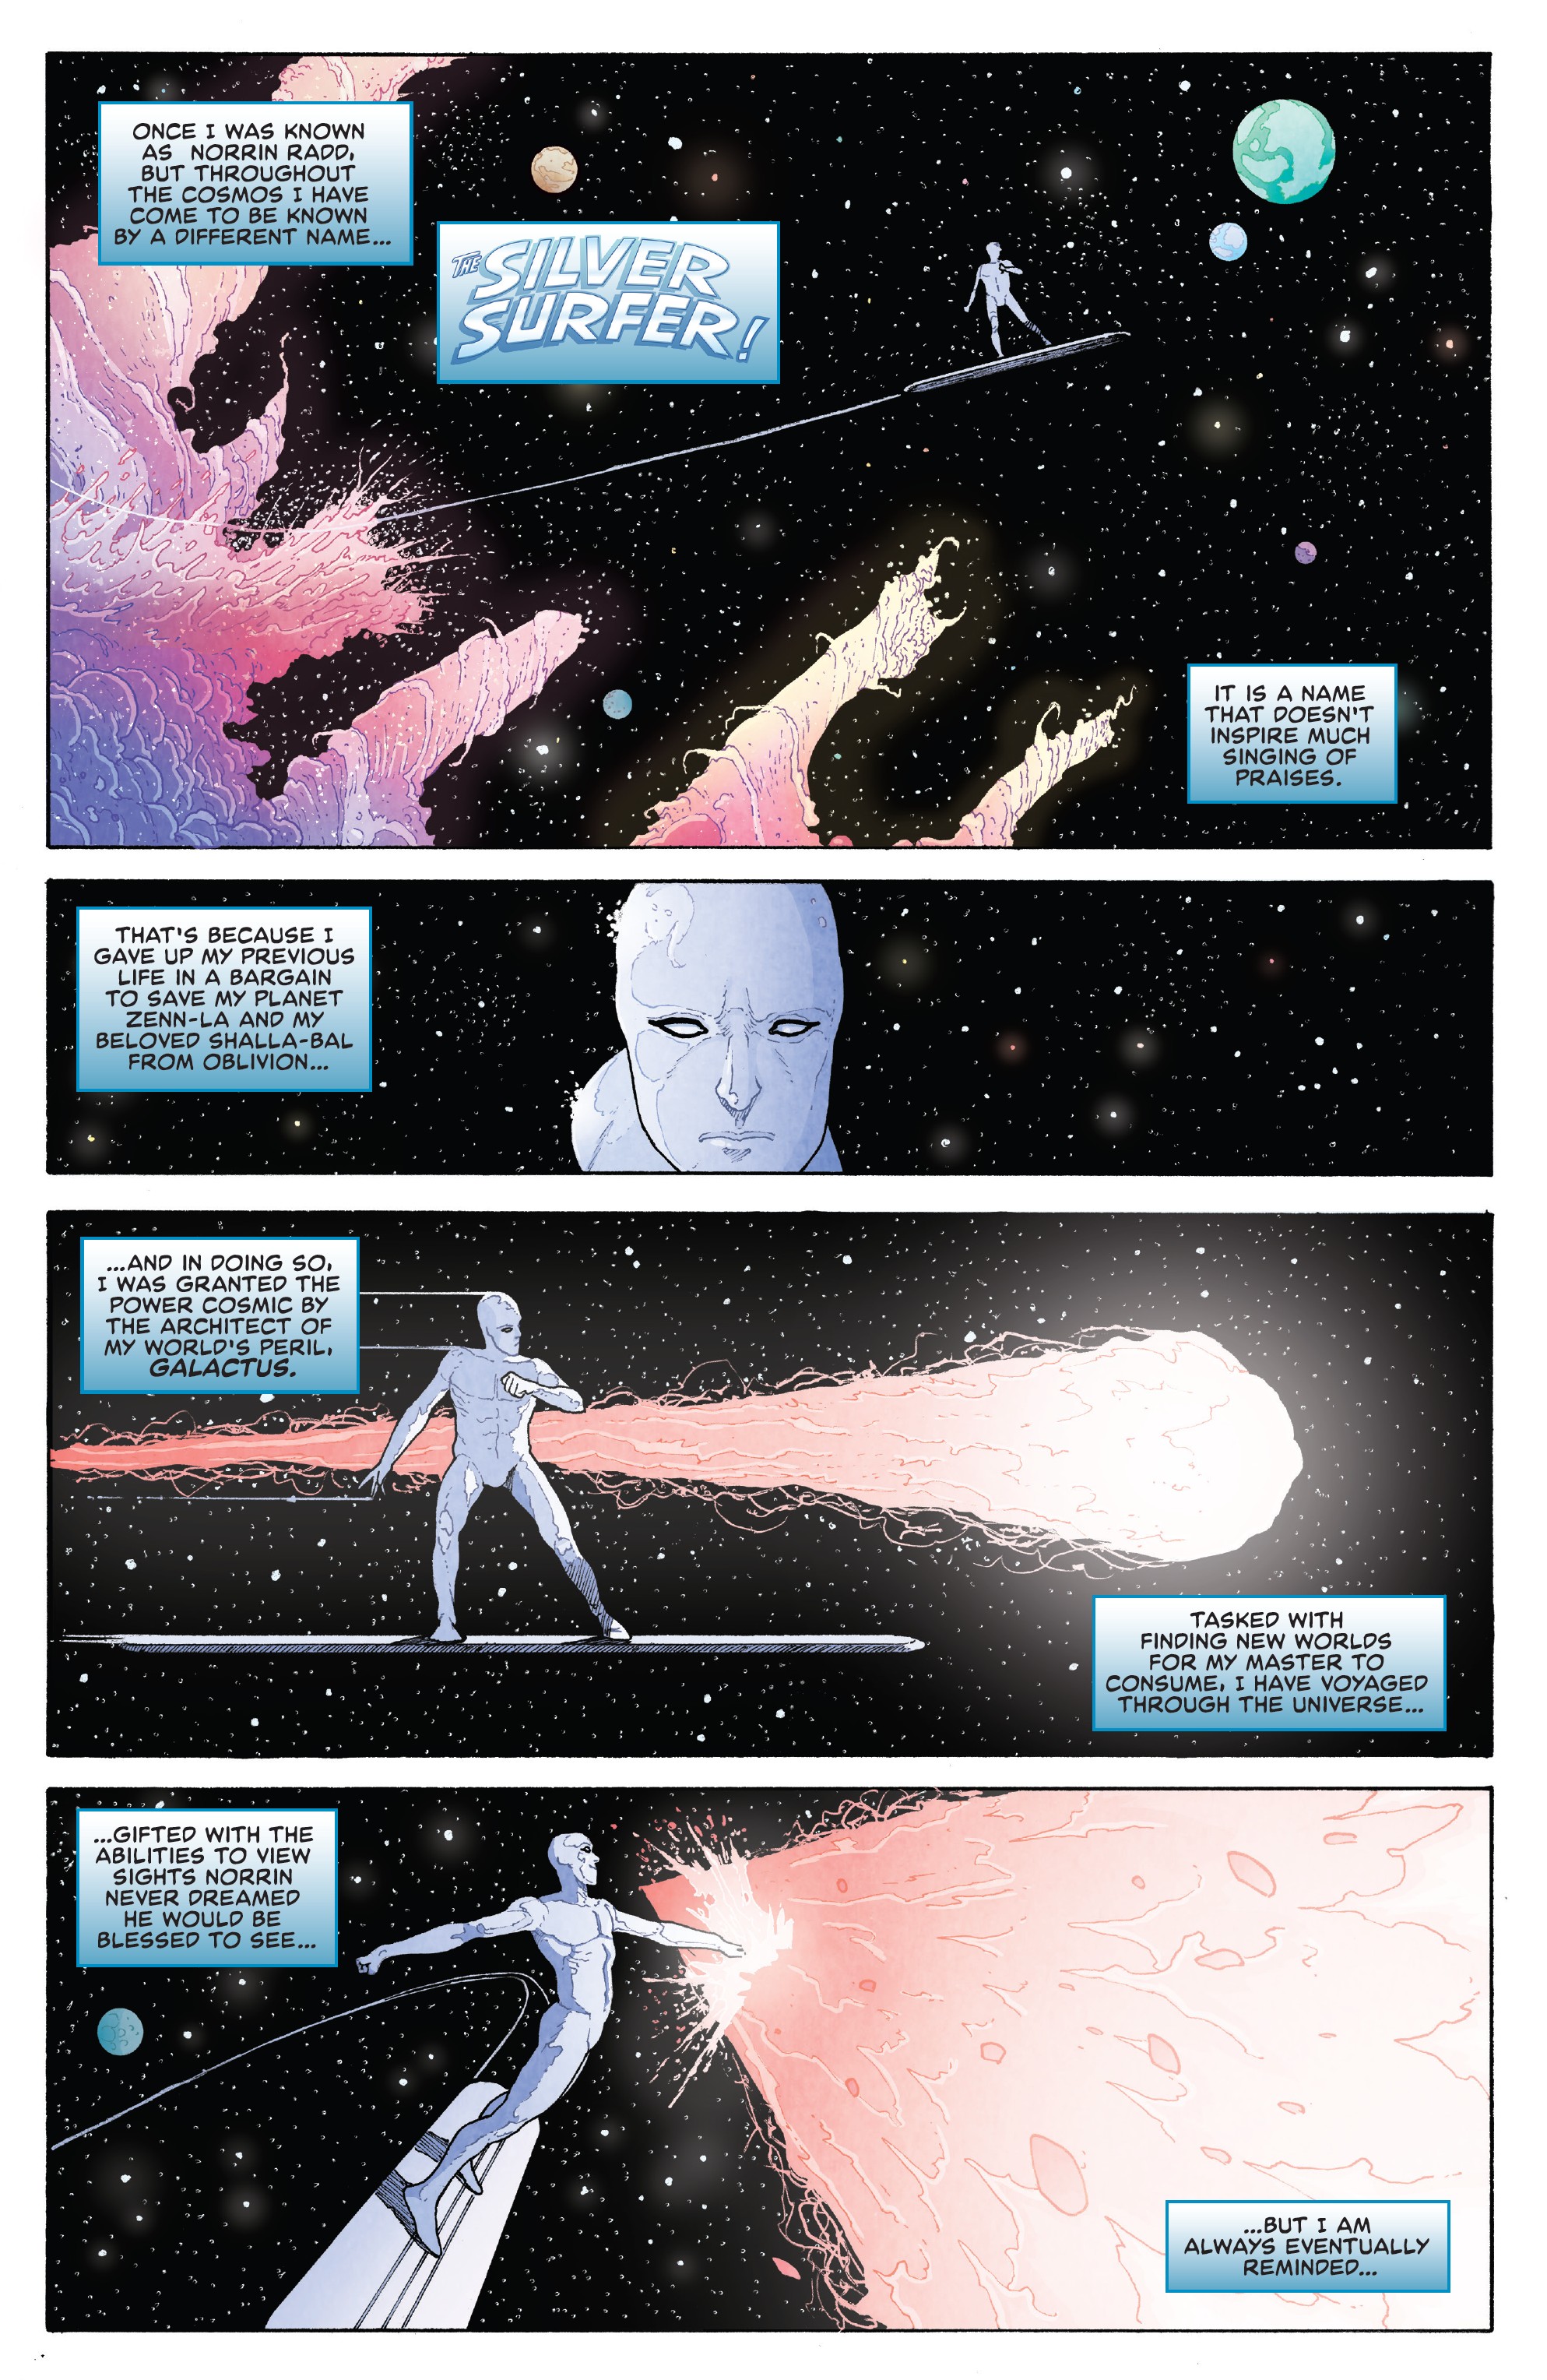 Silver Surfer (2016-): Chapter Annual-1 - Page 3